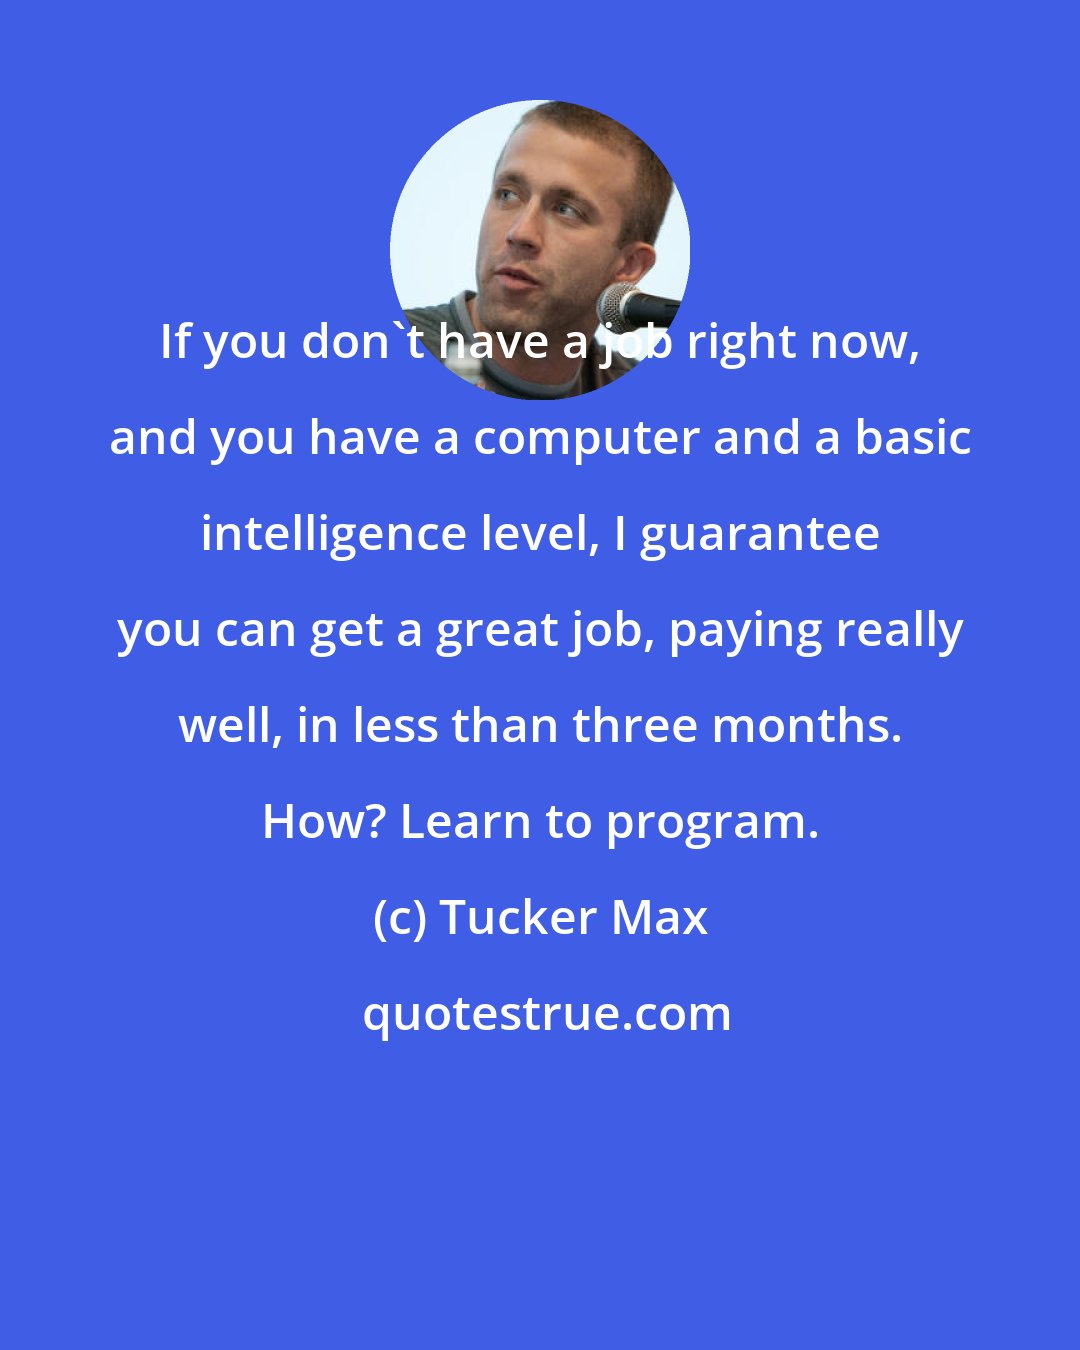 Tucker Max: If you don't have a job right now, and you have a computer and a basic intelligence level, I guarantee you can get a great job, paying really well, in less than three months. How? Learn to program.